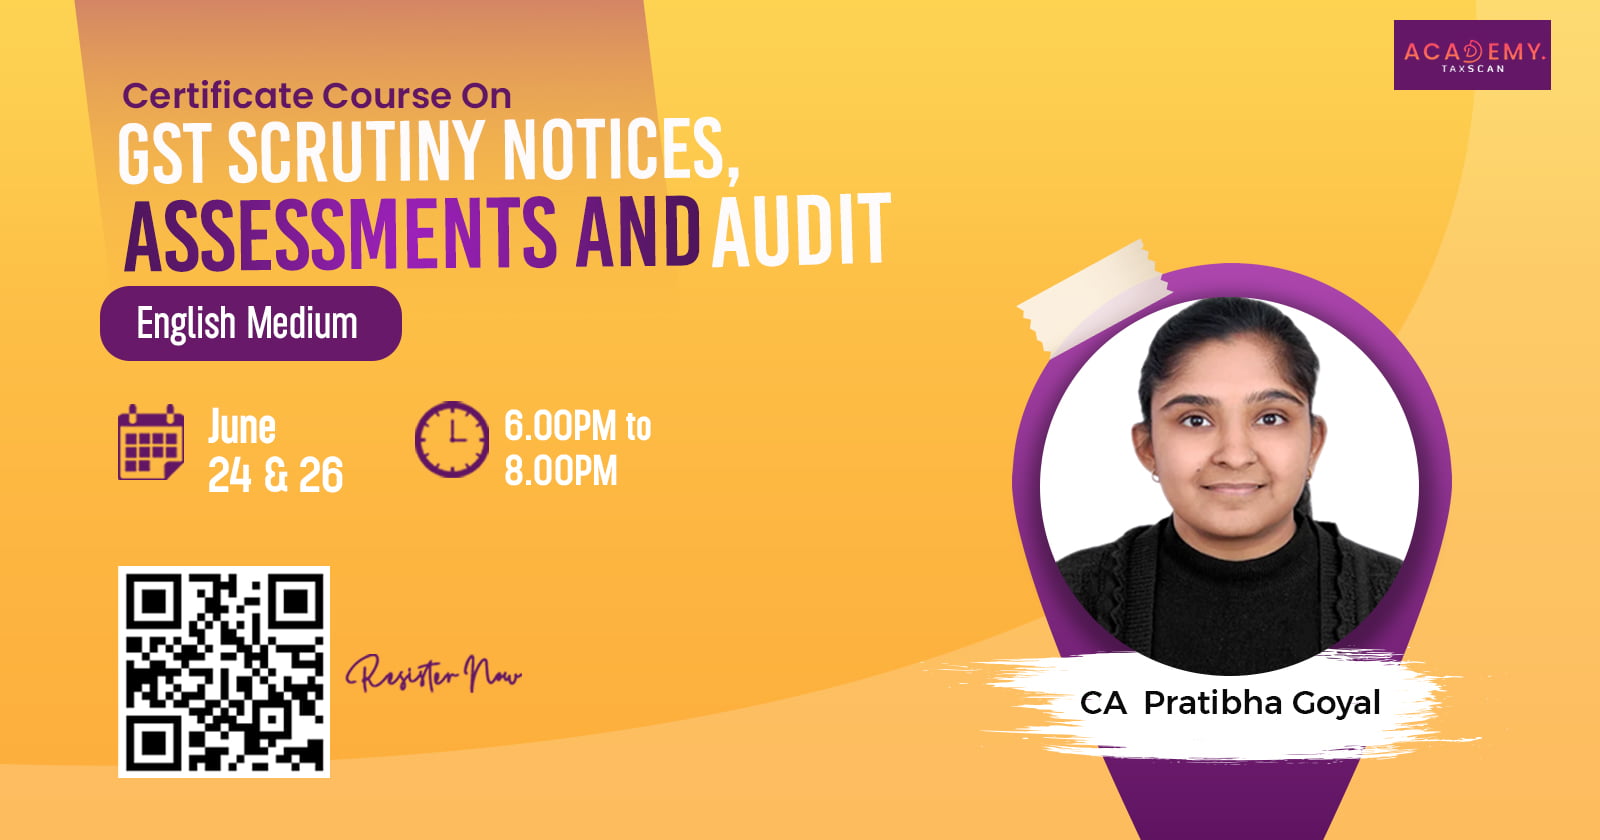 GST Scrutiny Notices - Assessments and Audit - GST Scrutiny - Scrutiny Notices - Assessments - Audit - GST - Notices - Certificate Course - online certificate course - Course 2023 - Taxscan academy